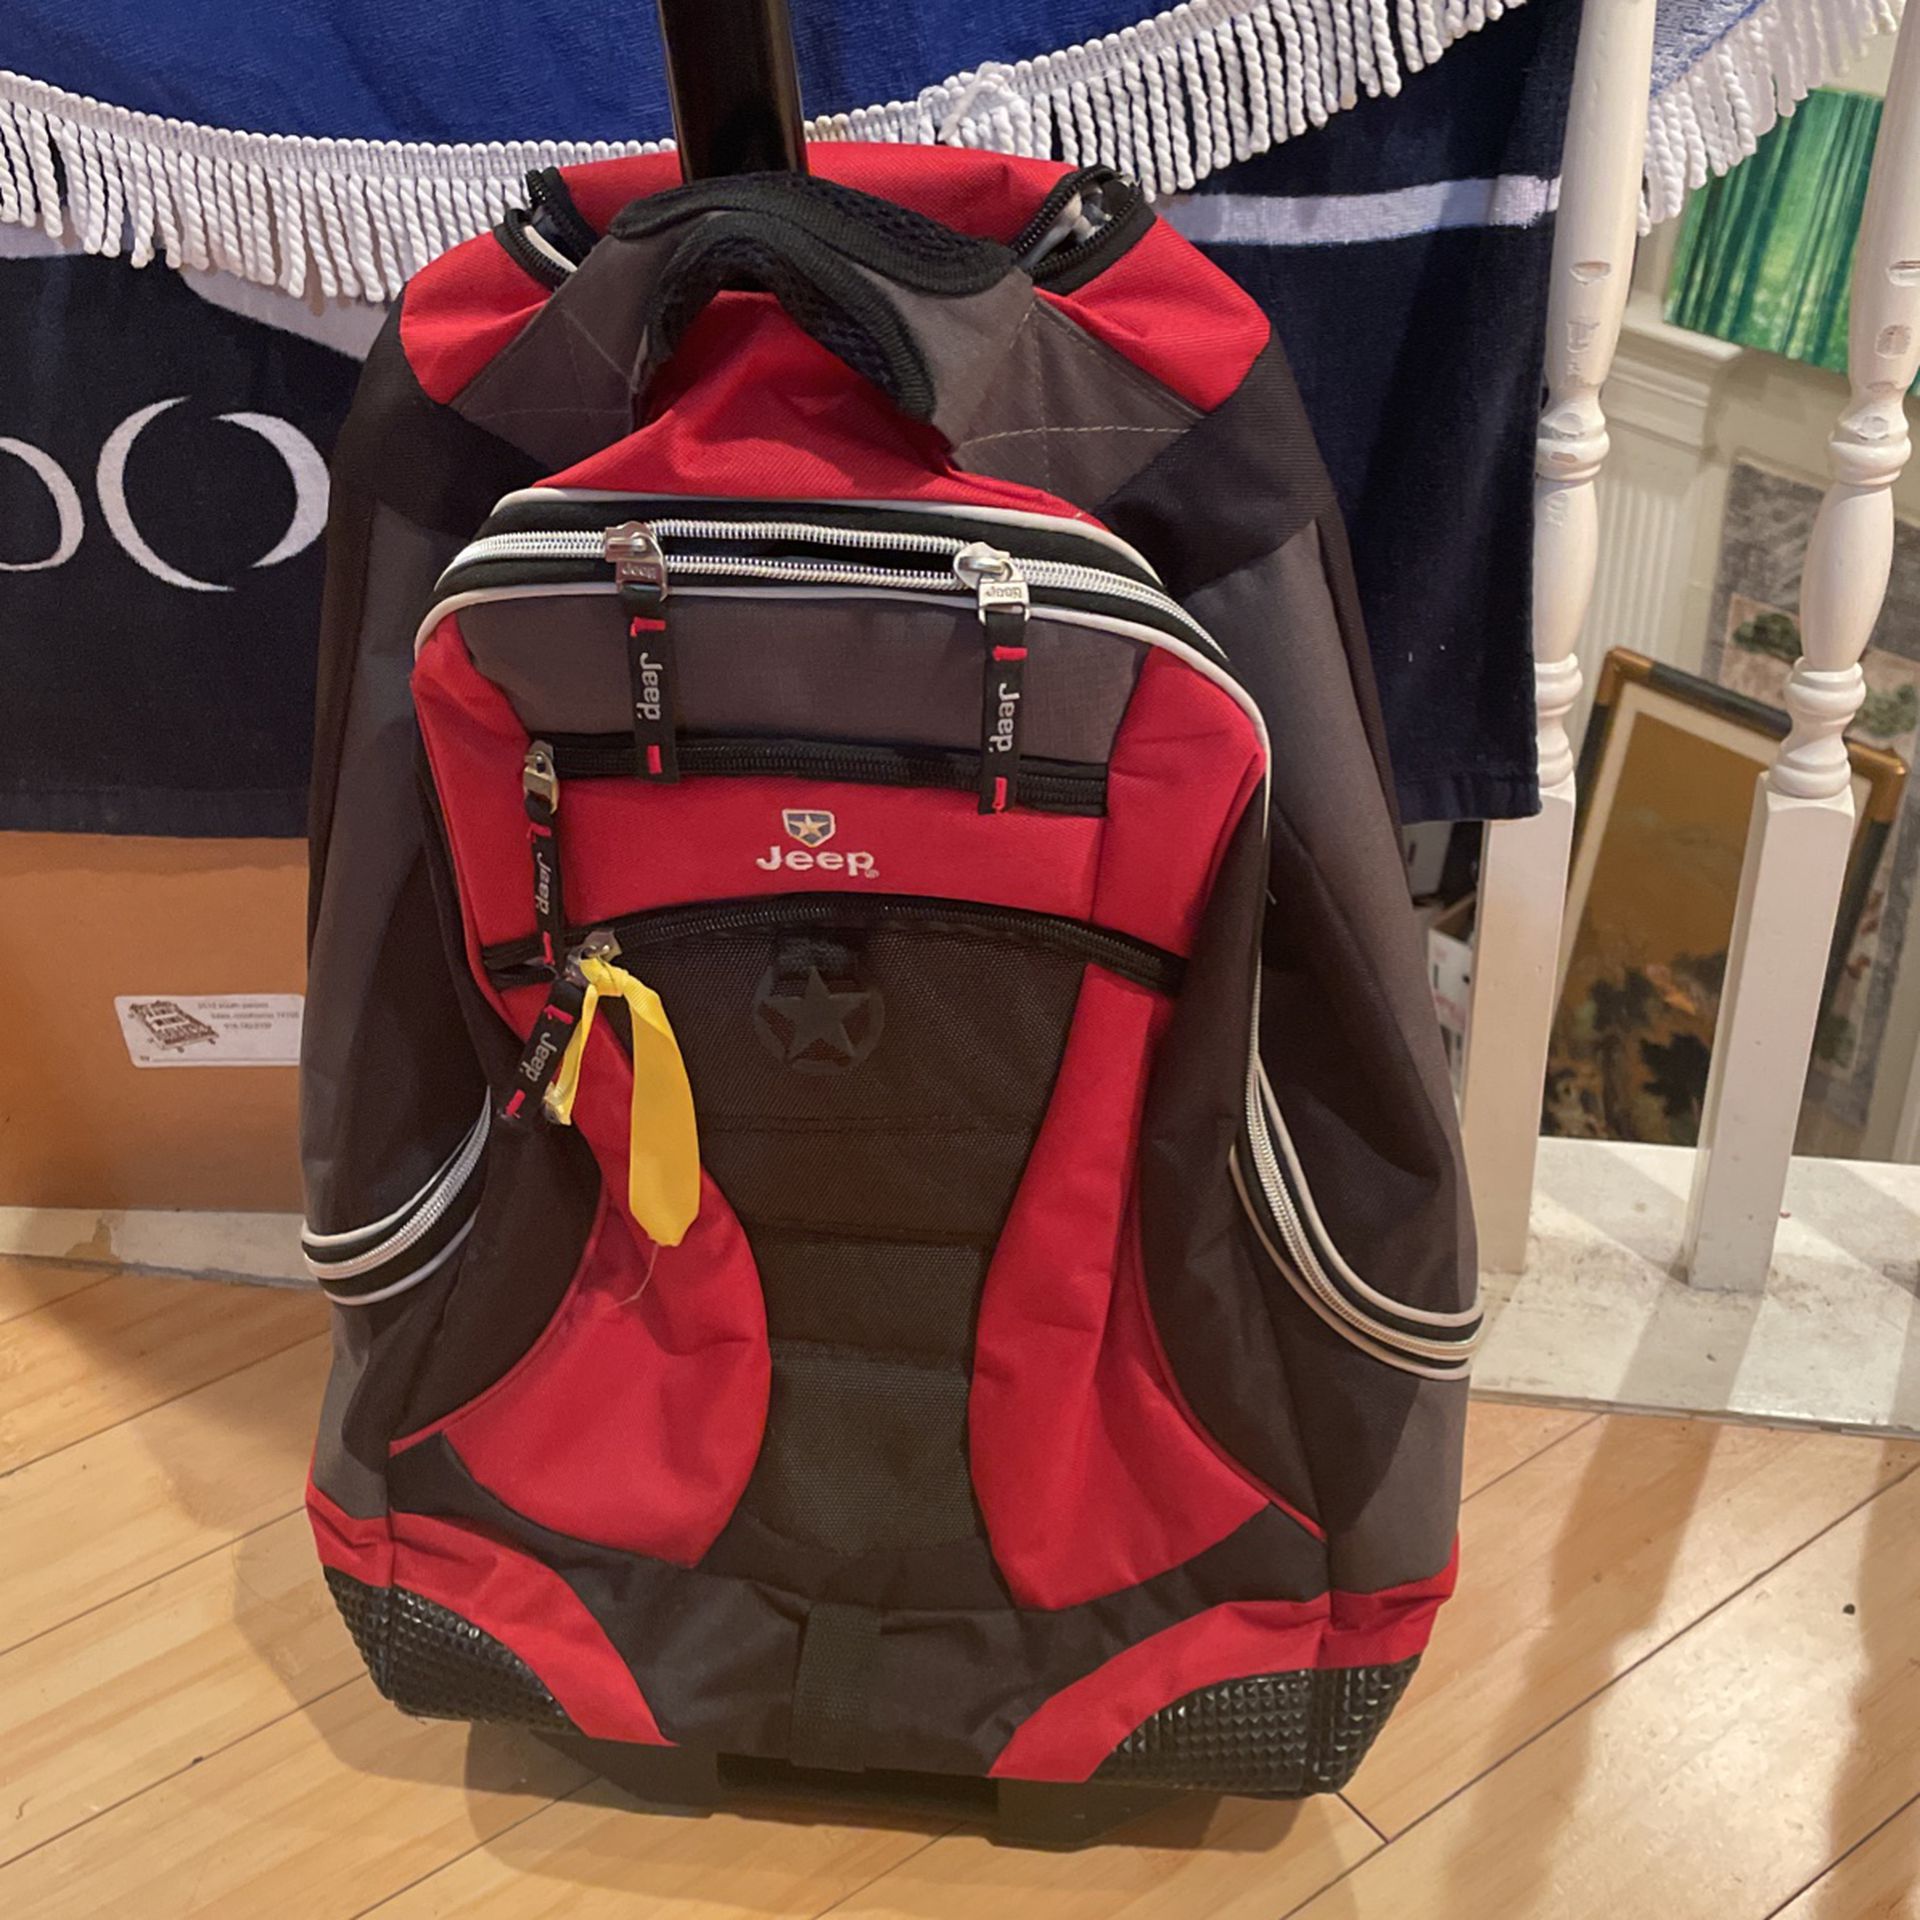 STL Cardinals Rolling Backpack for Sale in O'fallon, MO - OfferUp